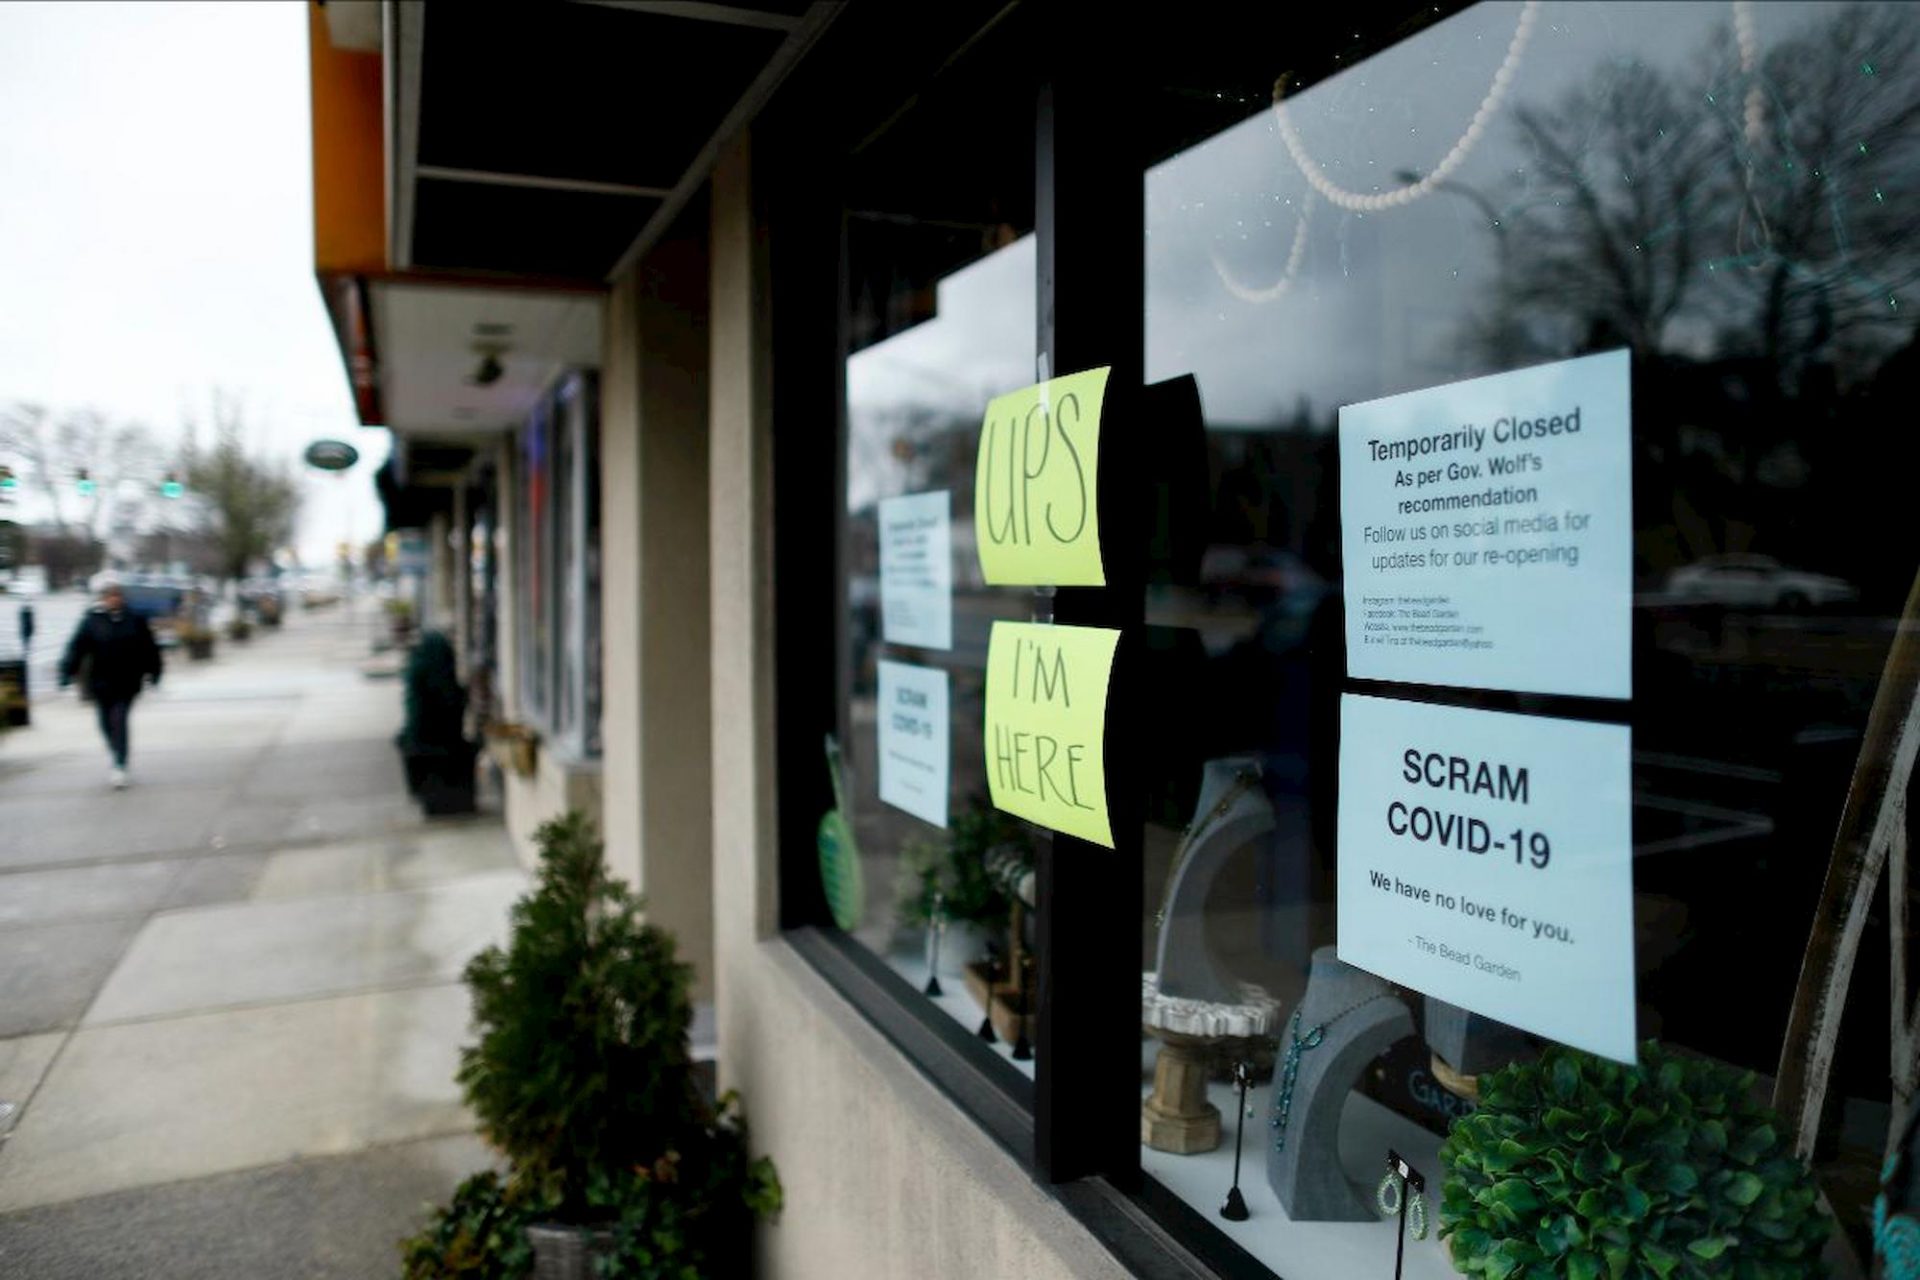 A person walks past a closed craft store, Tuesday, March 17, 2020, in Havertown, Pa. Concerns about the new coronavirus have led to the temporary closure of many businesses and schools across the region. (AP Photo/Matt Slocum)